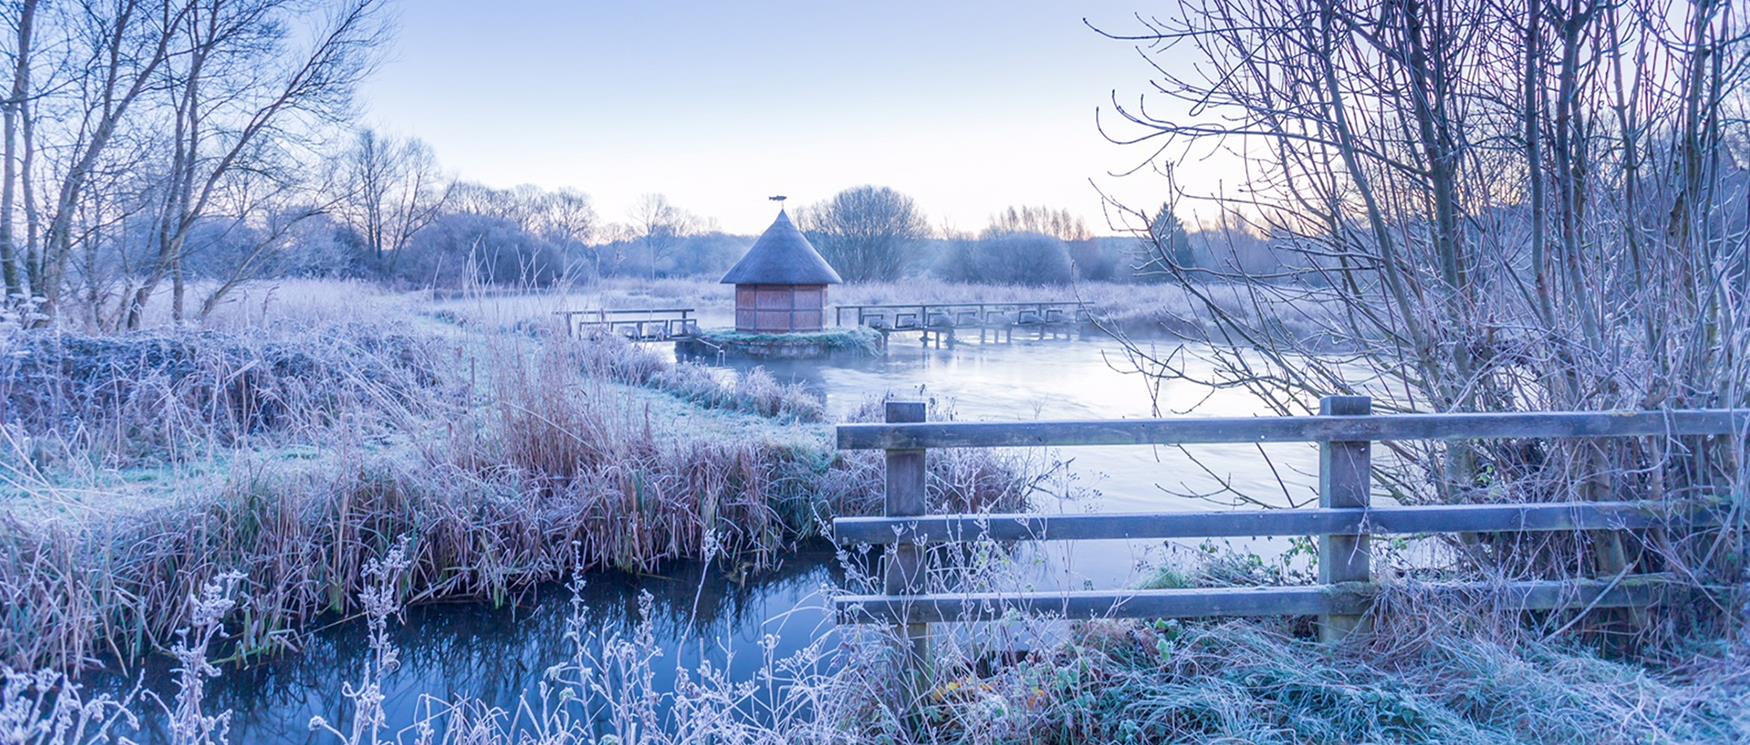 Winter Photography Competition - Longstock in the Test Valley